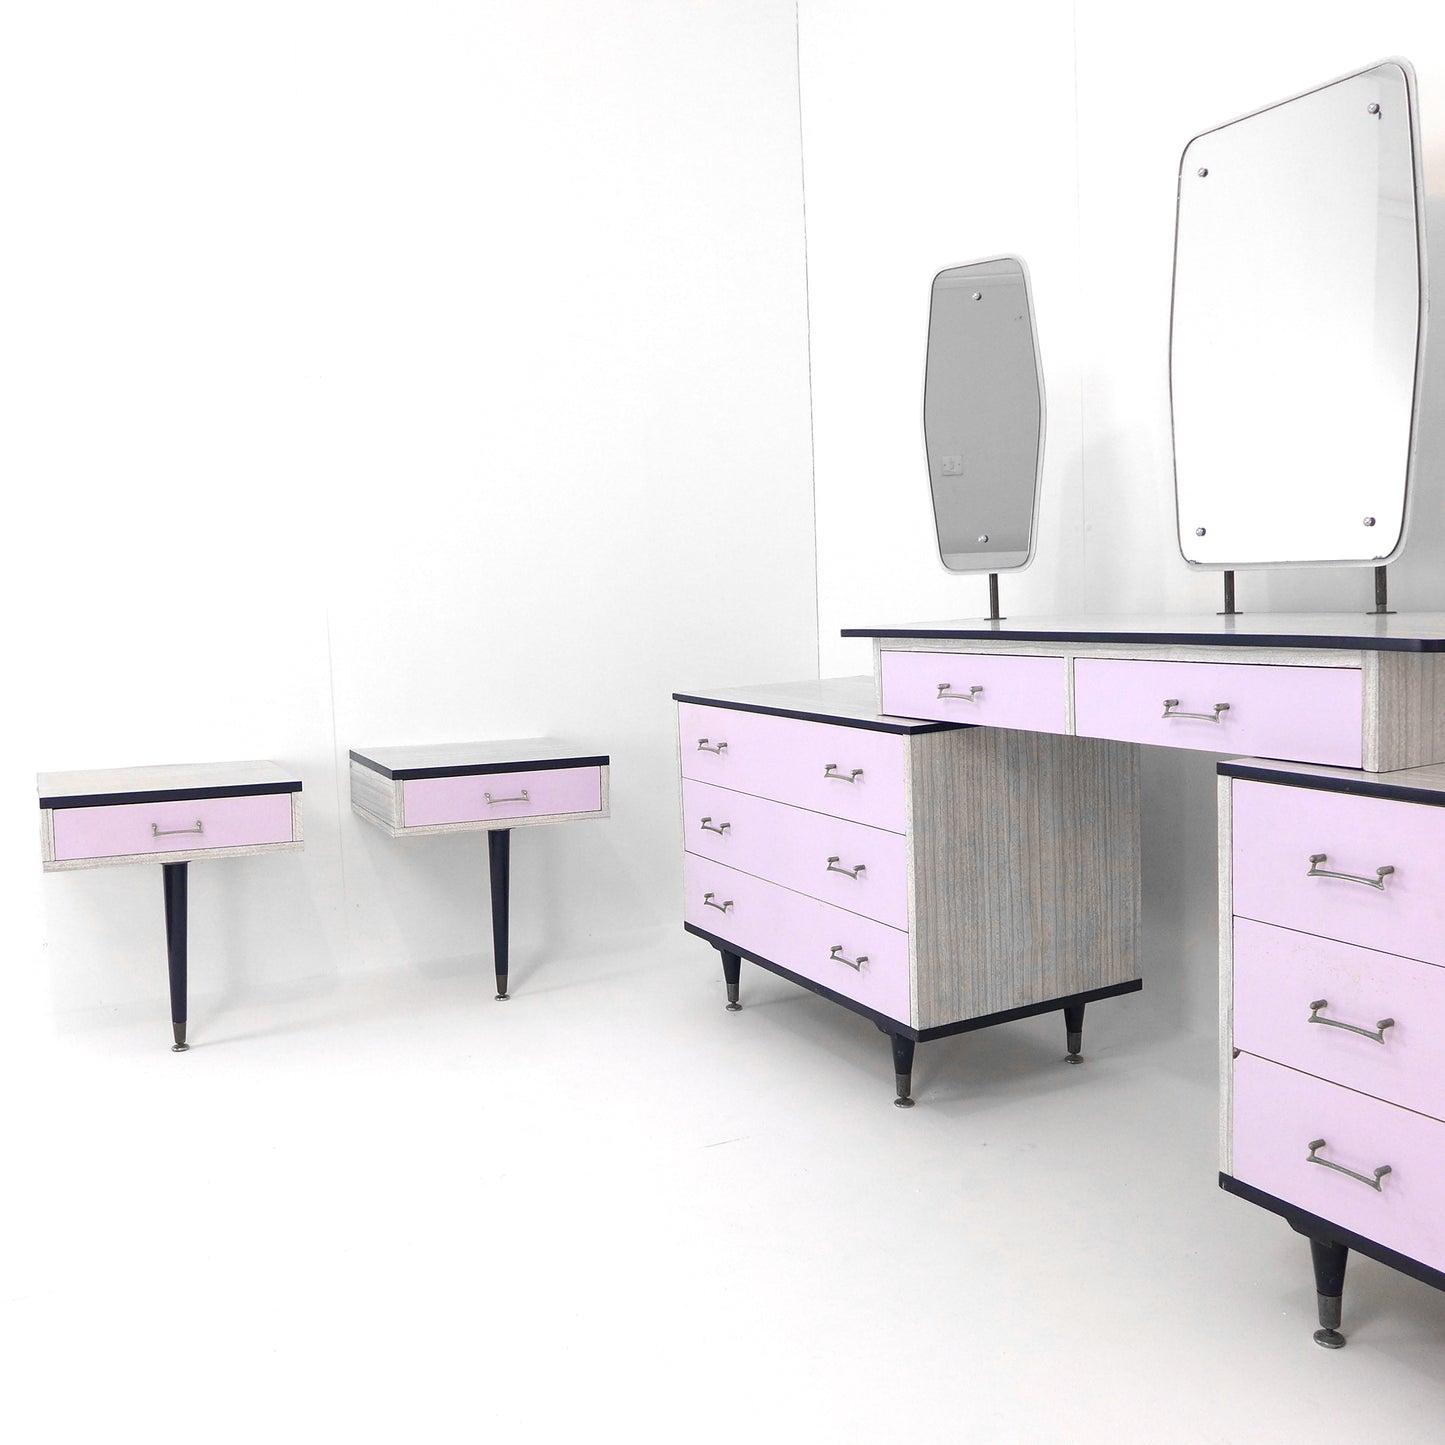 Mid Century Bedroom Set - Bedside Tables & Dressing table / Chest of Drawers with Mirrors - Vintage Melamine